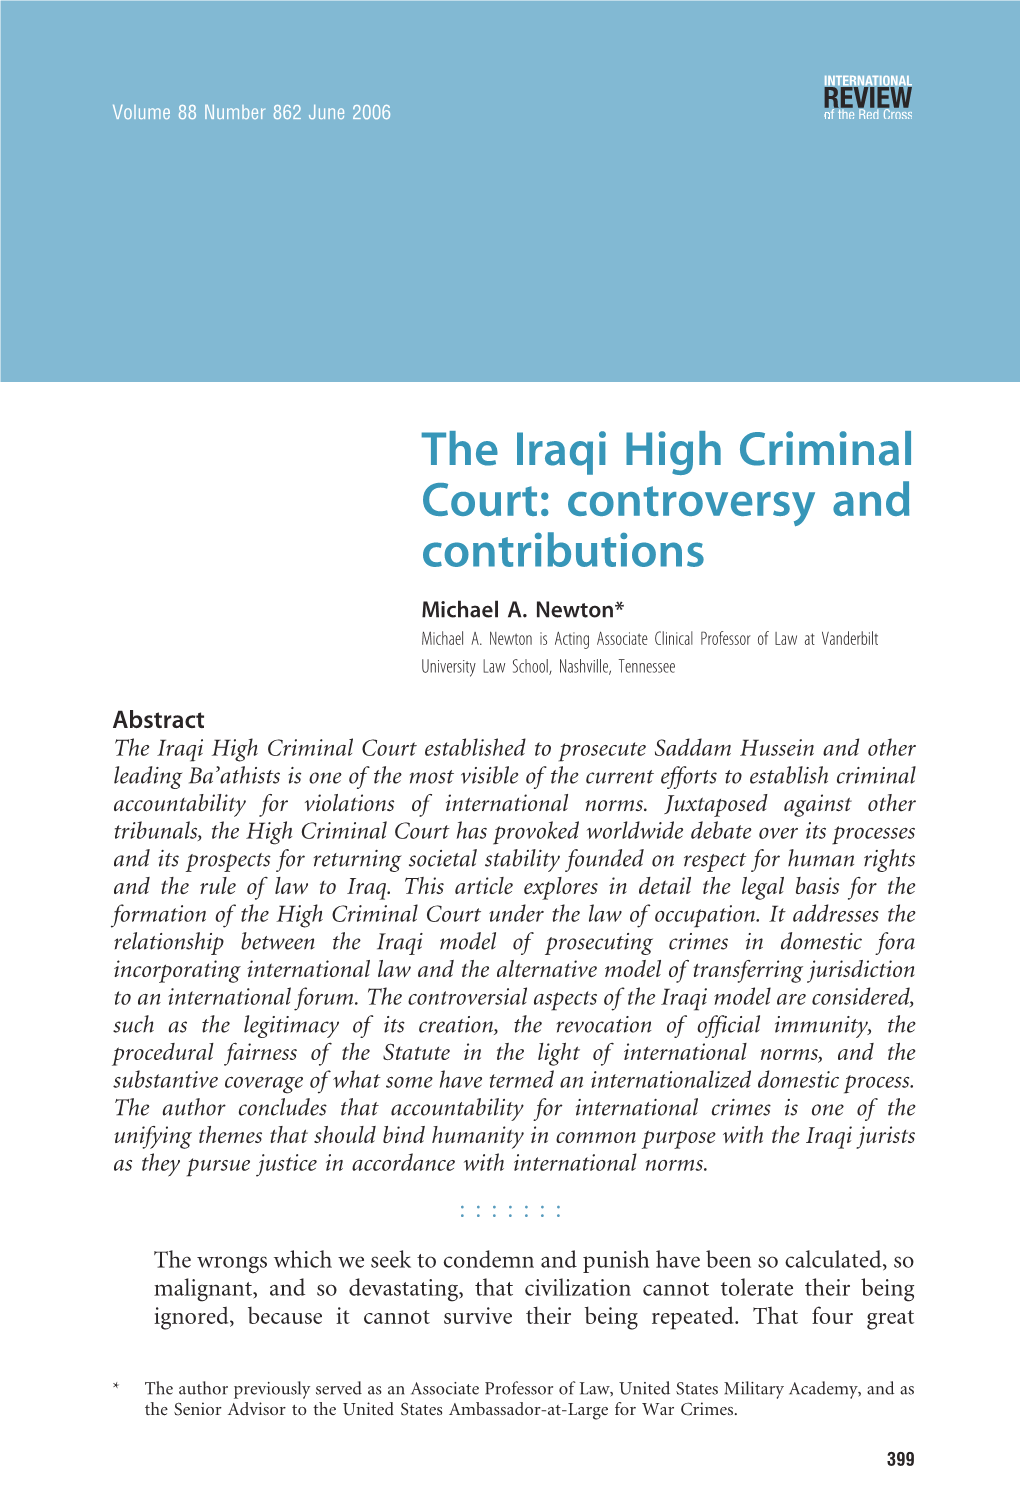 The Iraqi High Criminal Court: Controversy and Contributions Michael A